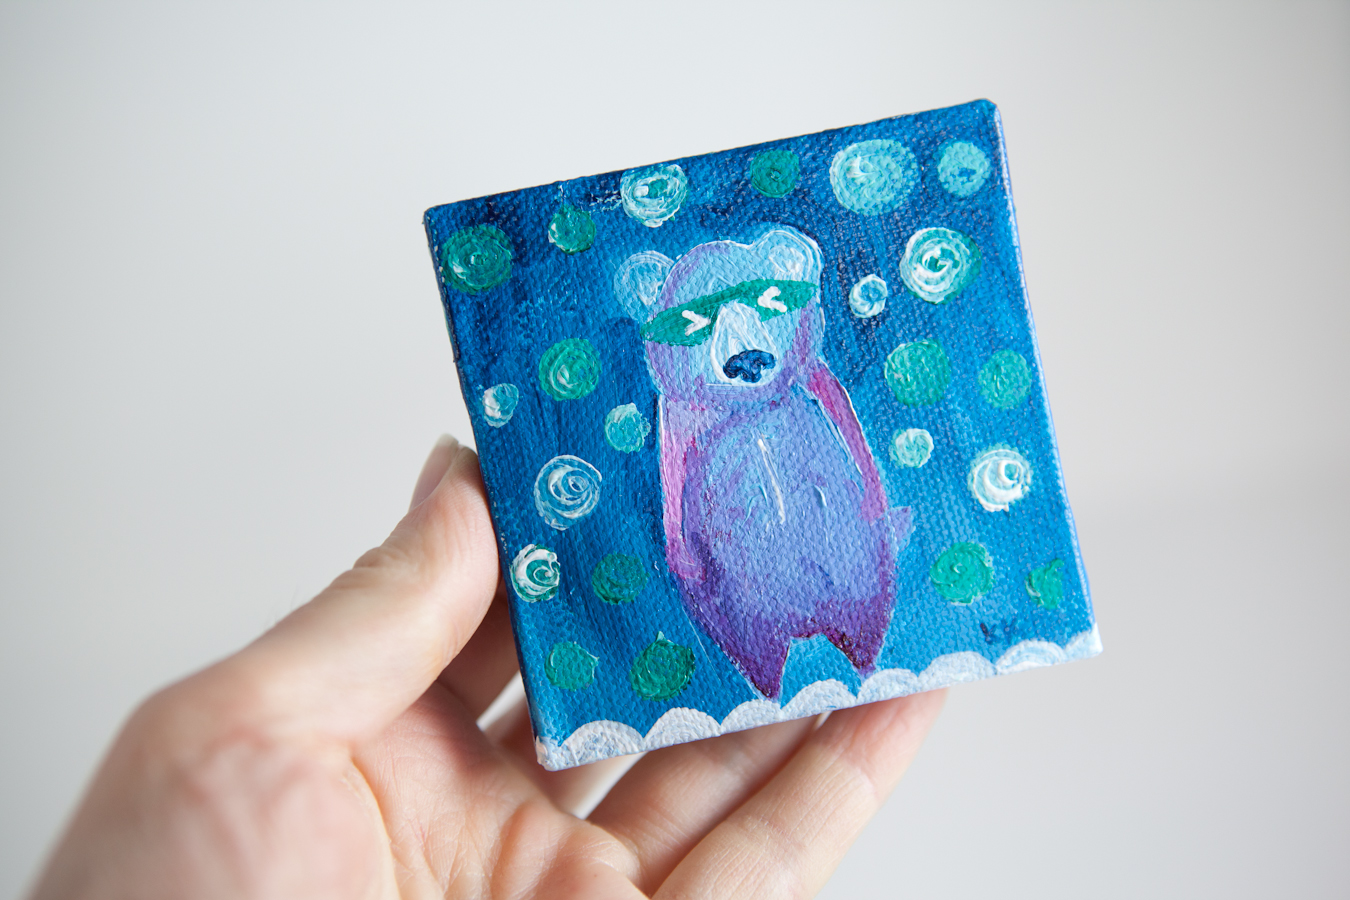 Colorful Bear Totem, Miniature Painting, Whimsical Small Art, Children's Animal Character, Blue - Original Mini Painting by Kimberly Kling